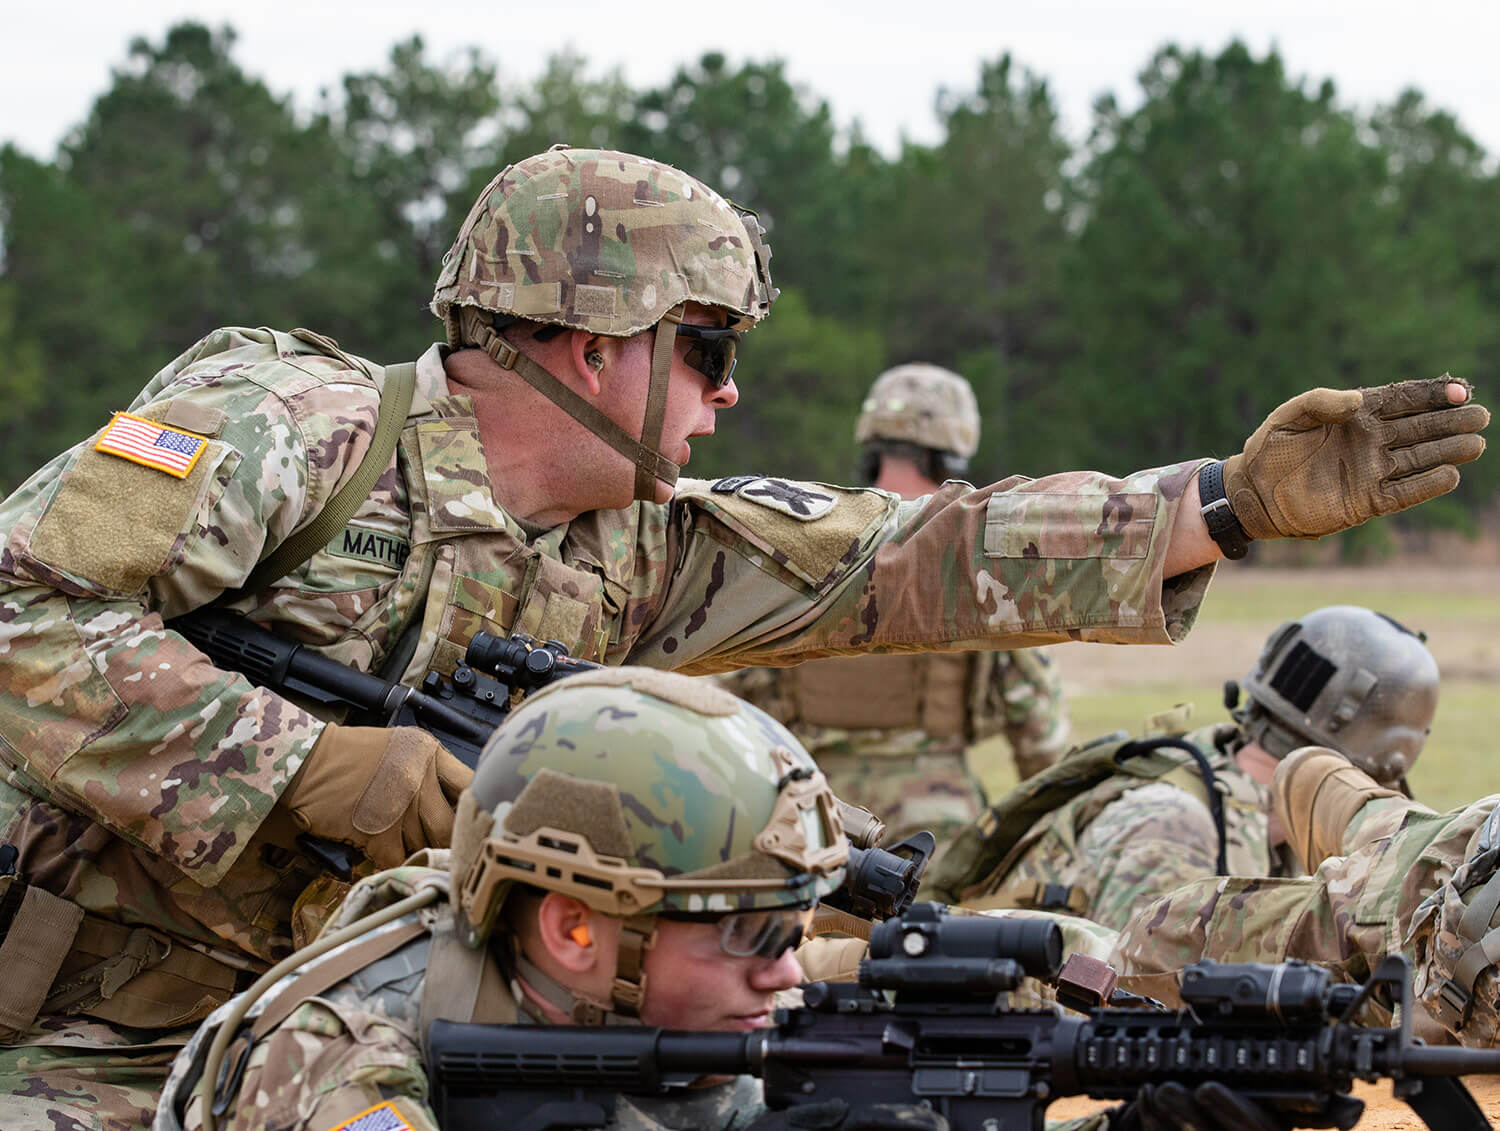 Alabama Army National Guard Soldiers, with the 1-173rd Infantry Regiment, take part in a live-fire trench warfare exercise at Fort Benning, Ga., March 2019. Alabama Army National Guard photo by SSG William Frye